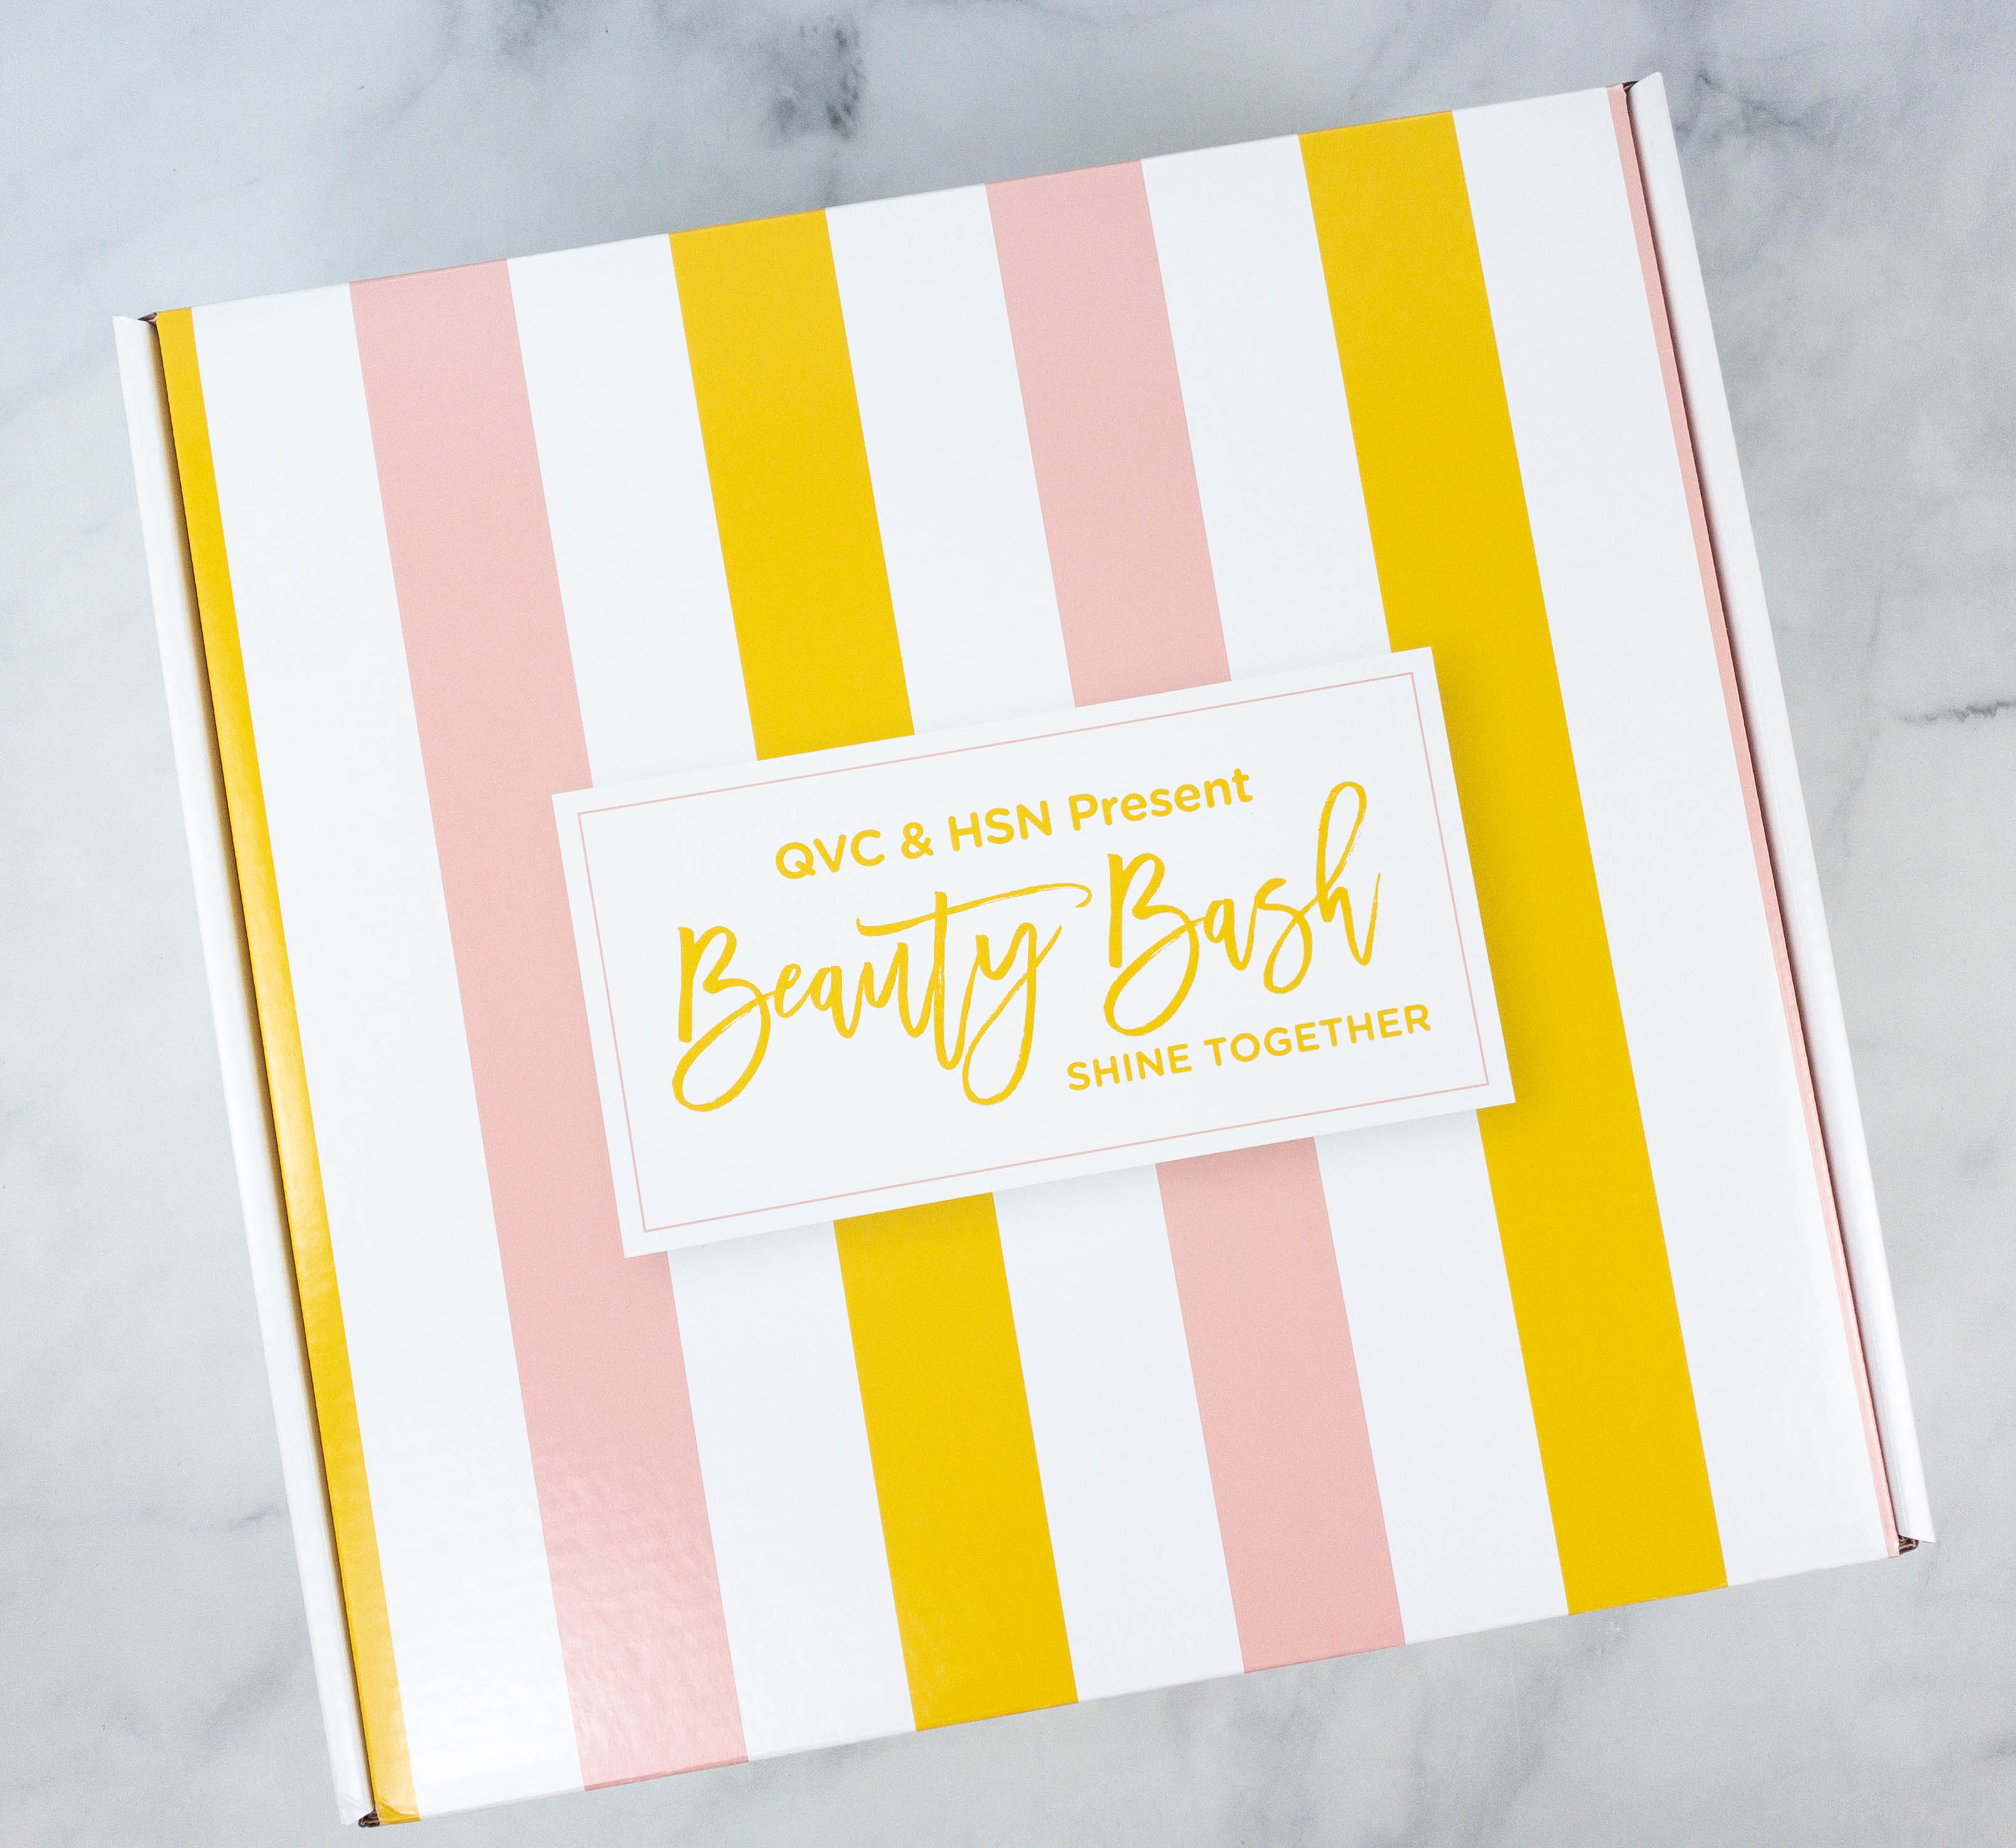 Qvc Hsn 21 Beauty Bash Discovery Box Review Hello Subscription